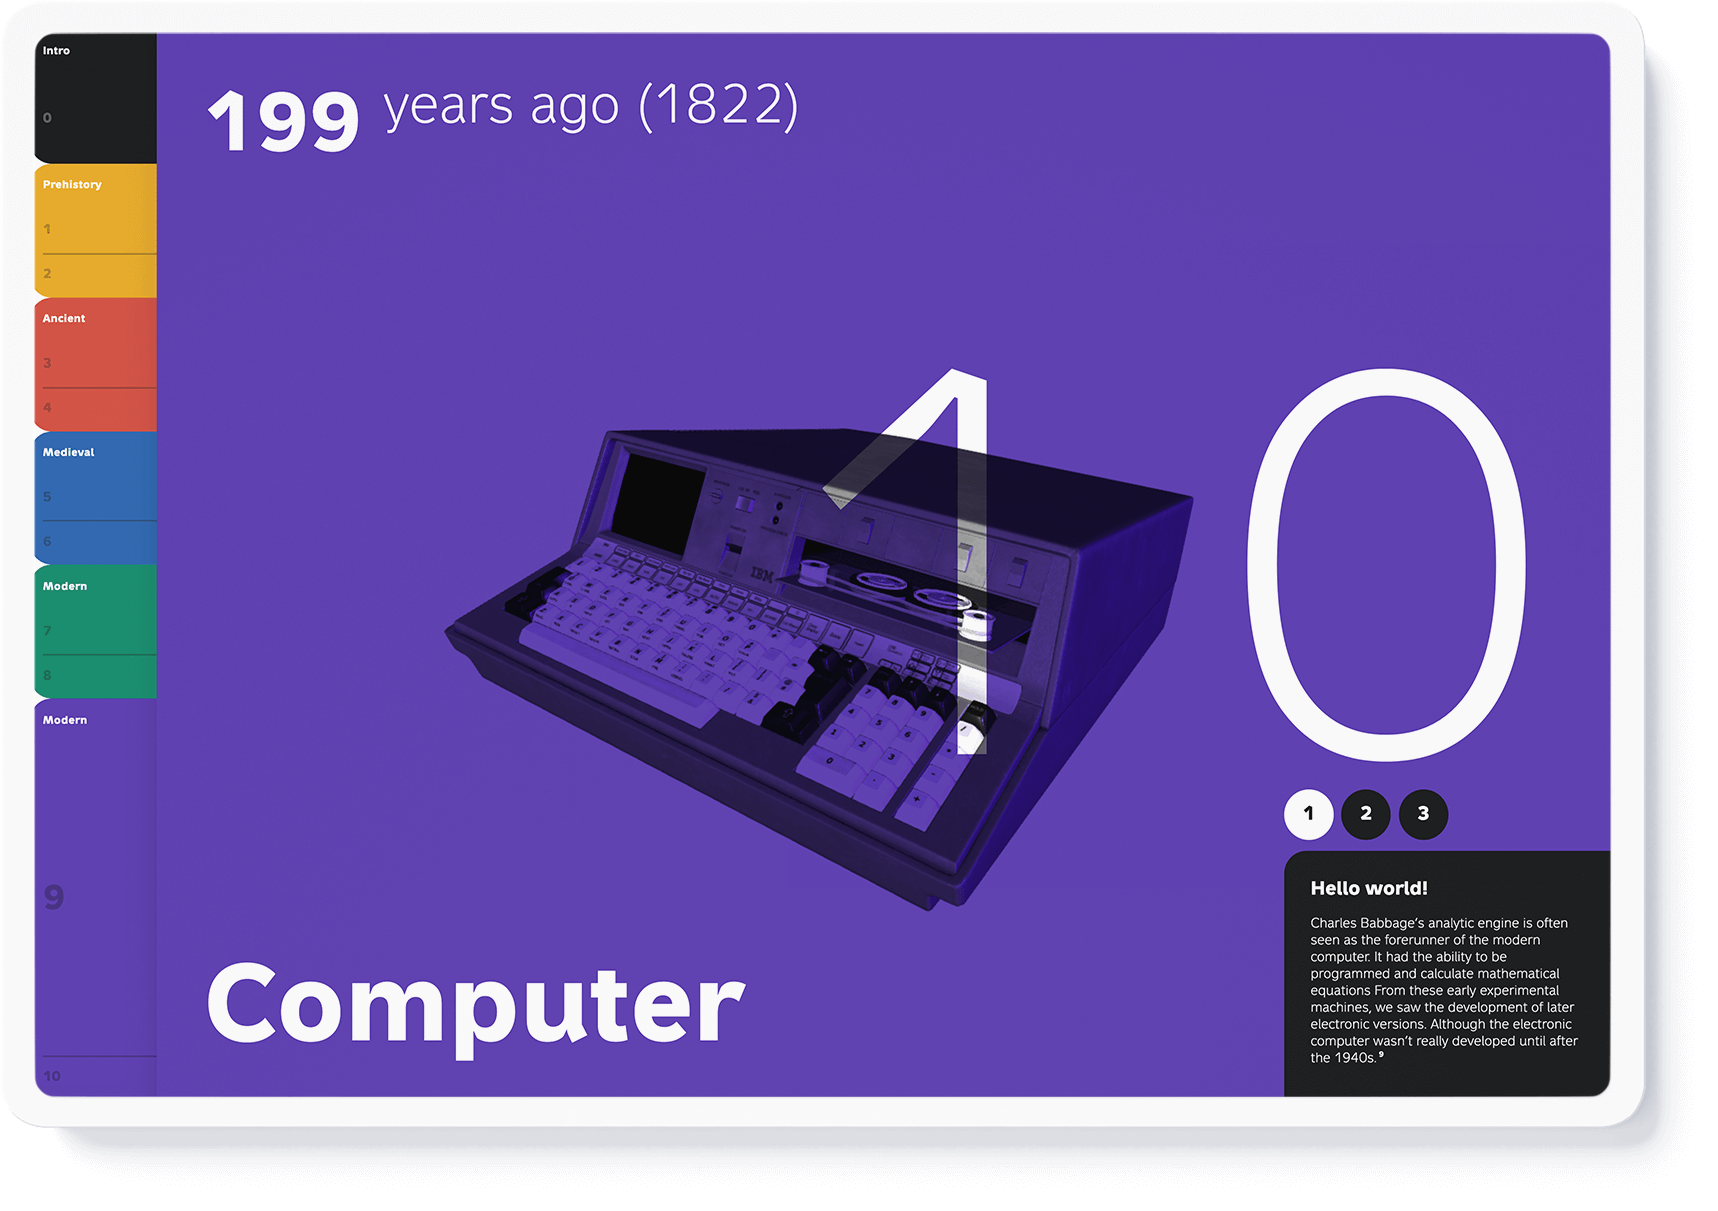 Interactive 3D model of an early computer on purple ground (design by Nahuel Gerth)